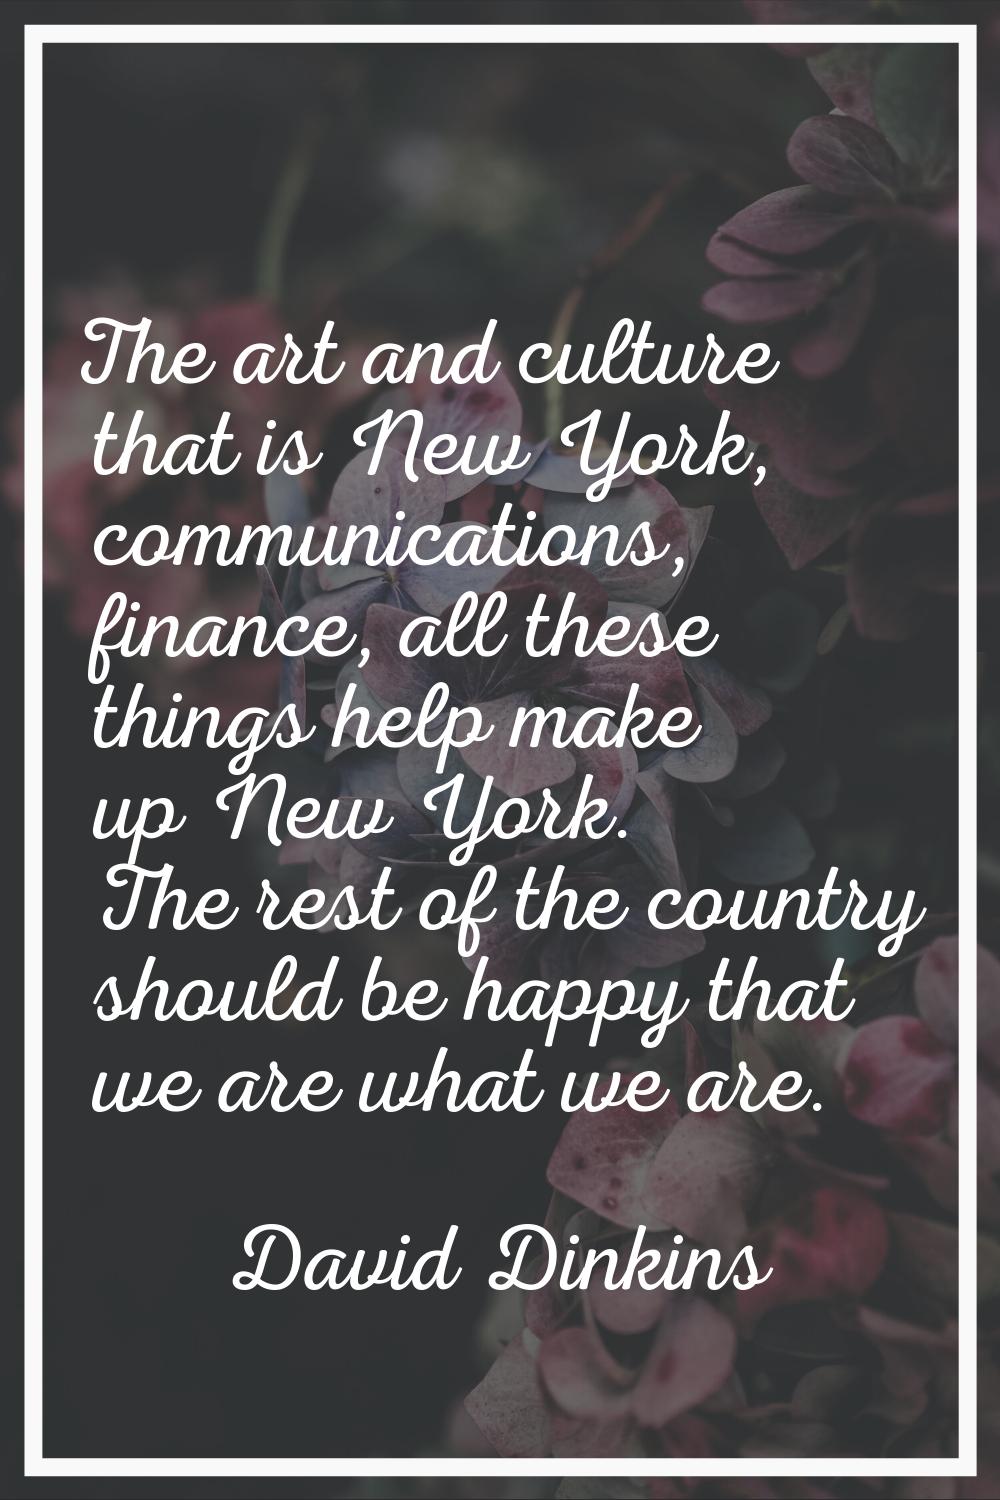 The art and culture that is New York, communications, finance, all these things help make up New Yo